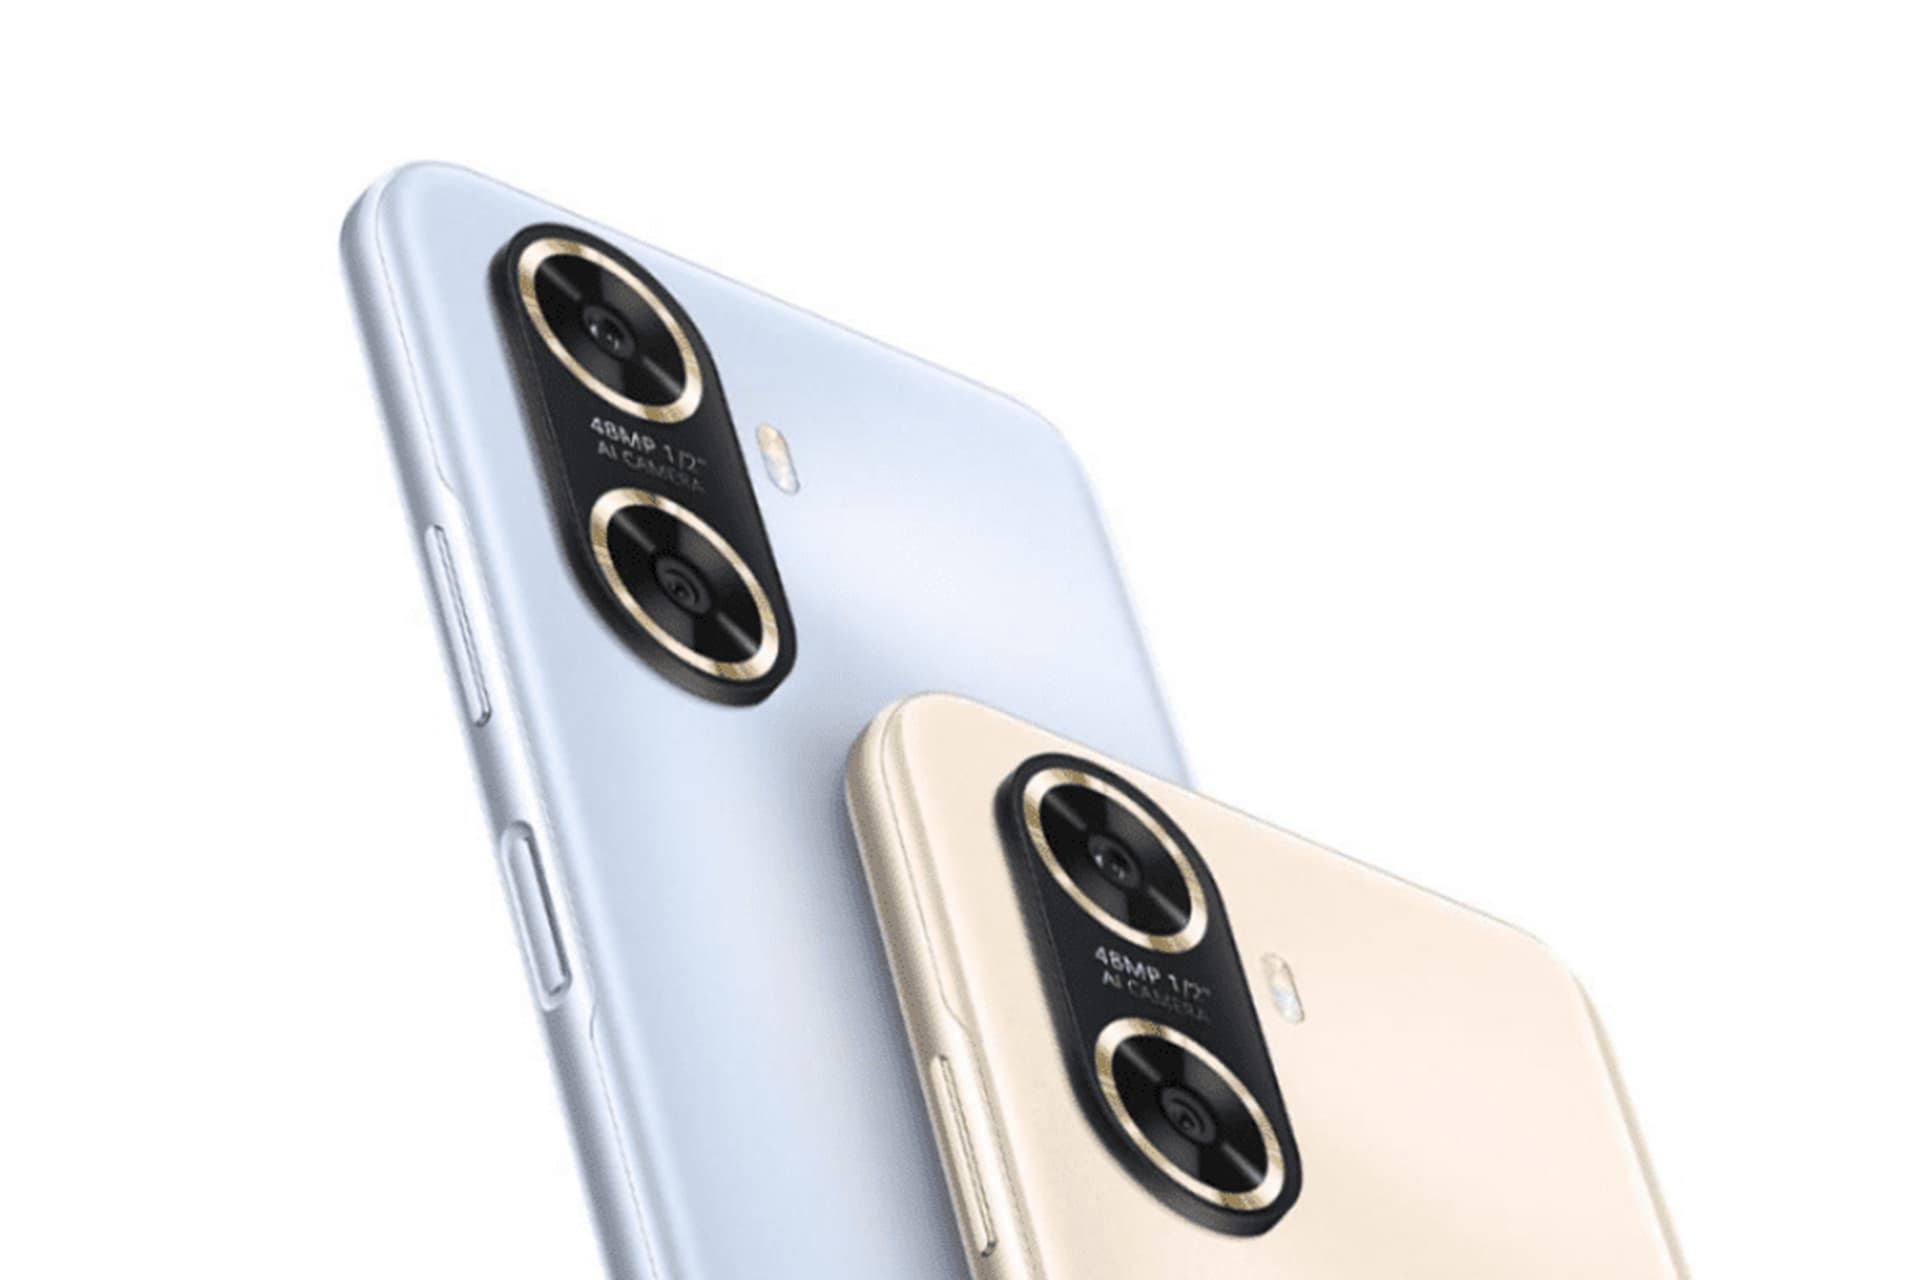 Huawei Enjoy 60 back panel in gold and blue colors